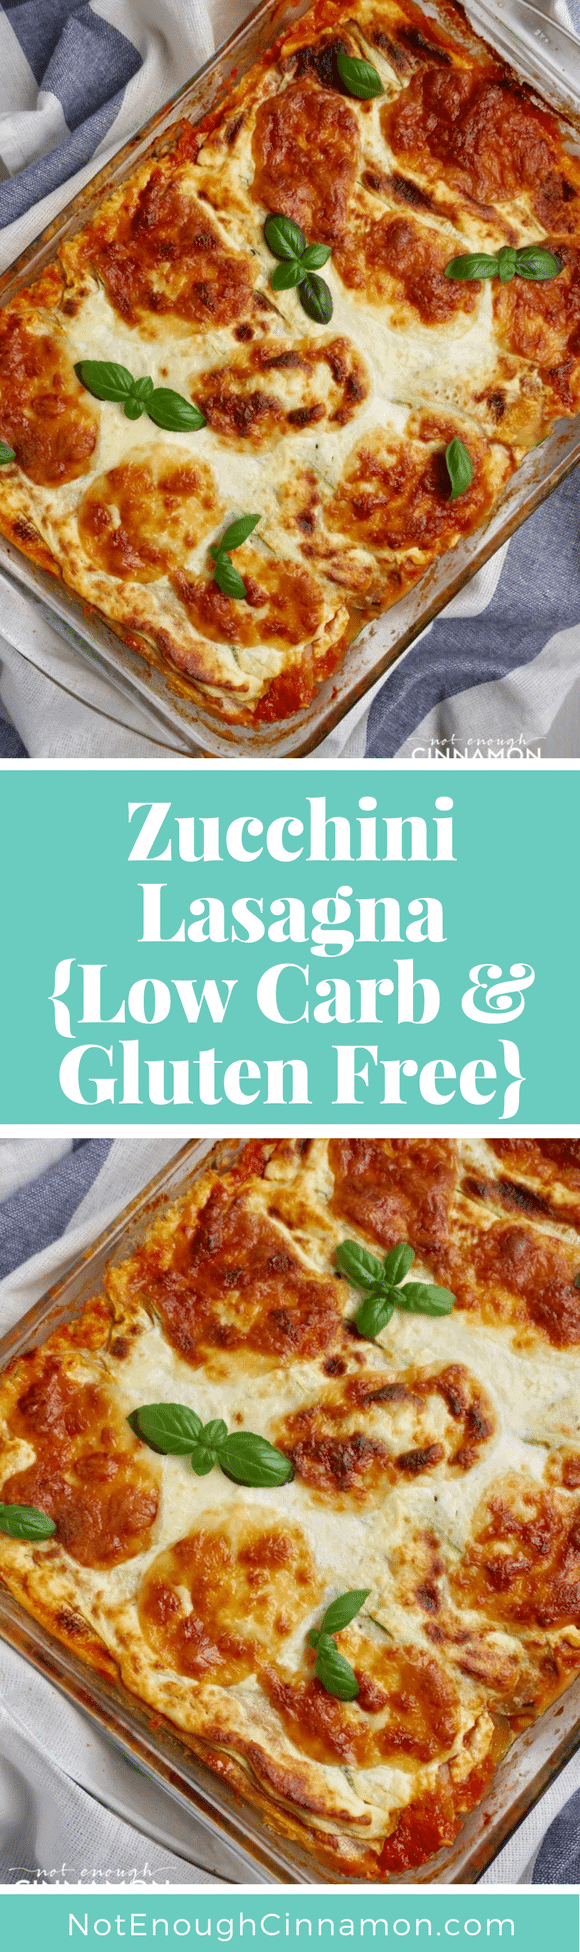 Delicious lasagna made with zucchini instead of pasta! They're gluten-free, low carb and vegetarian. Great dinner idea! Recipe on NotEnoughCinnamon.com